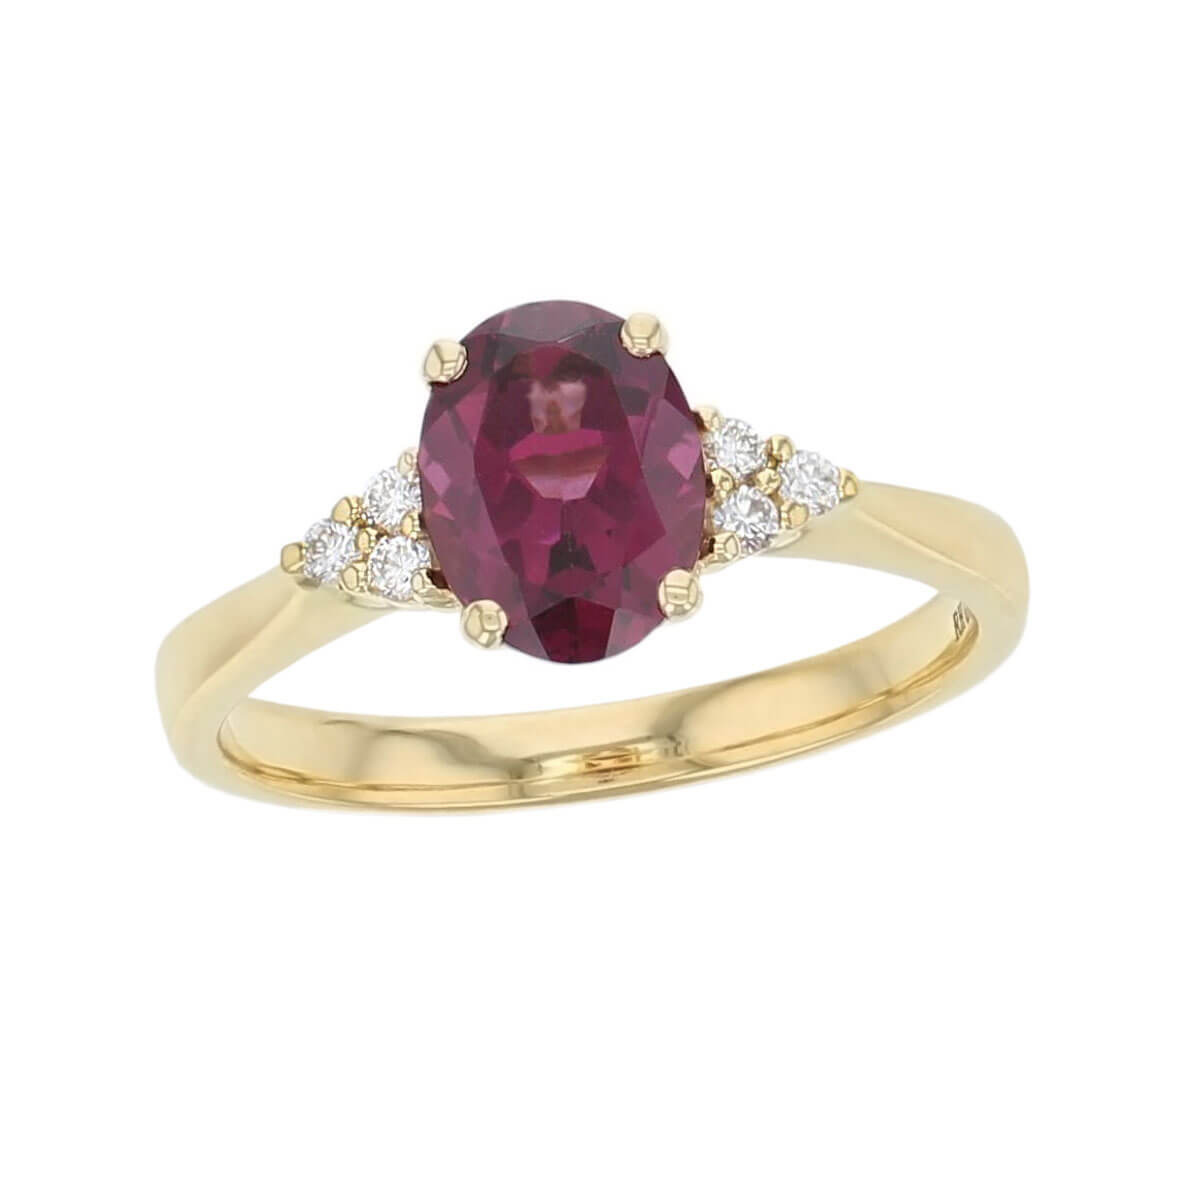 alternative engagement ring, 18ct yellow gold ladies oval cut burgundy rhodolite garnet & diamond designer multi stone engagement ring designed & hand crafted by Faller of Derry/ Londonderry, dress ring, precious gem jewellery, jewelry, shoulder set